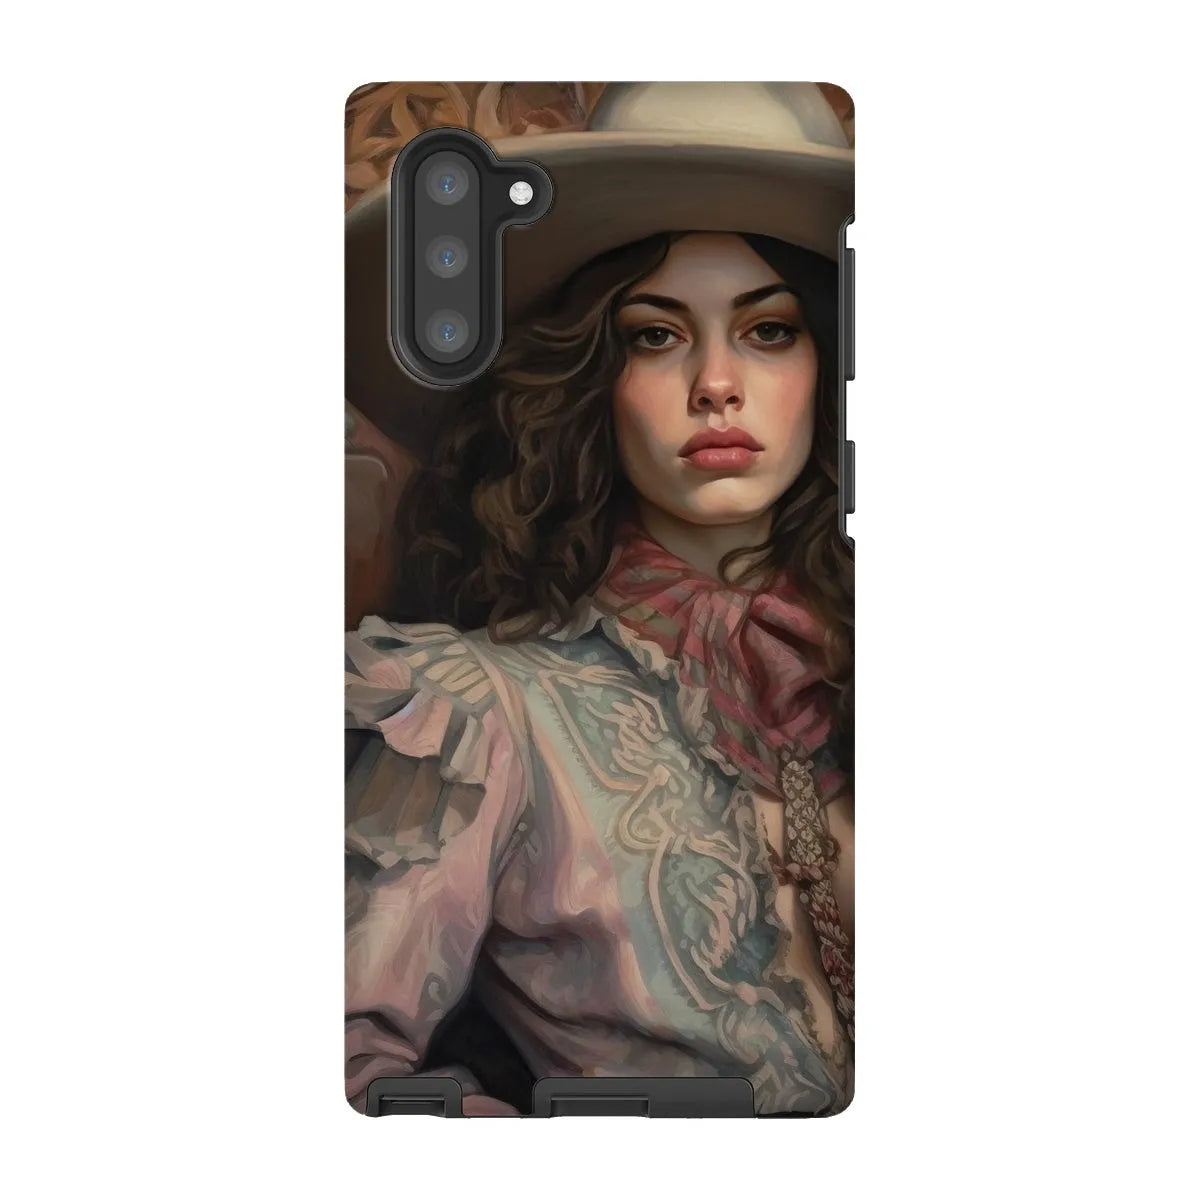 Alex The Lesbian Cowgirl - Sapphic Art Phone Case - Samsung Galaxy Note 10 / Matte - Mobile Phone Cases - Aesthetic Art